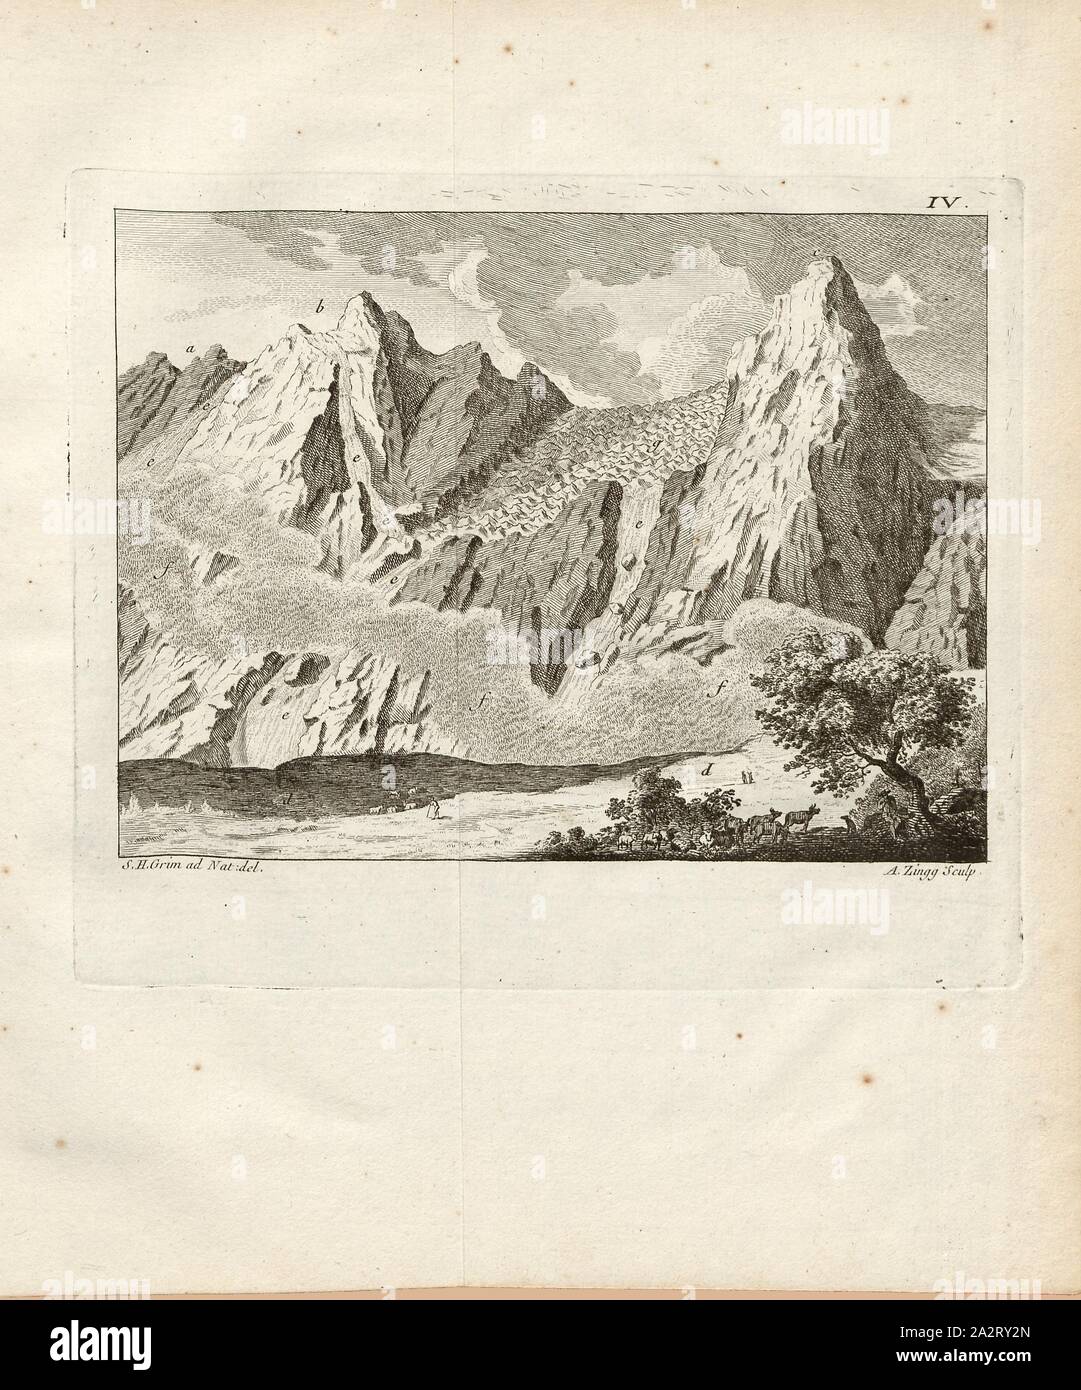 The cluster of Schwartswald, or Black Forest, In the background, the Rosenlaui glacier, in the foreground a shepherd grazing his herd, signed: S. H. Grim (ad nat. Del.); A. Zingg (sculp.), Fig. 6, IV, after p. 372, p. 401, Grim, S. H. (ad nat. del.); Zingg, Adrian (sculp.), 1770, Gottlieb Sigmund Gruner; Louis-Félix Guinement de Keralio: Histoire naturelle des glacieres de Suisse. Paris: Panckoucke, MDCCLXX [1770 Stock Photo